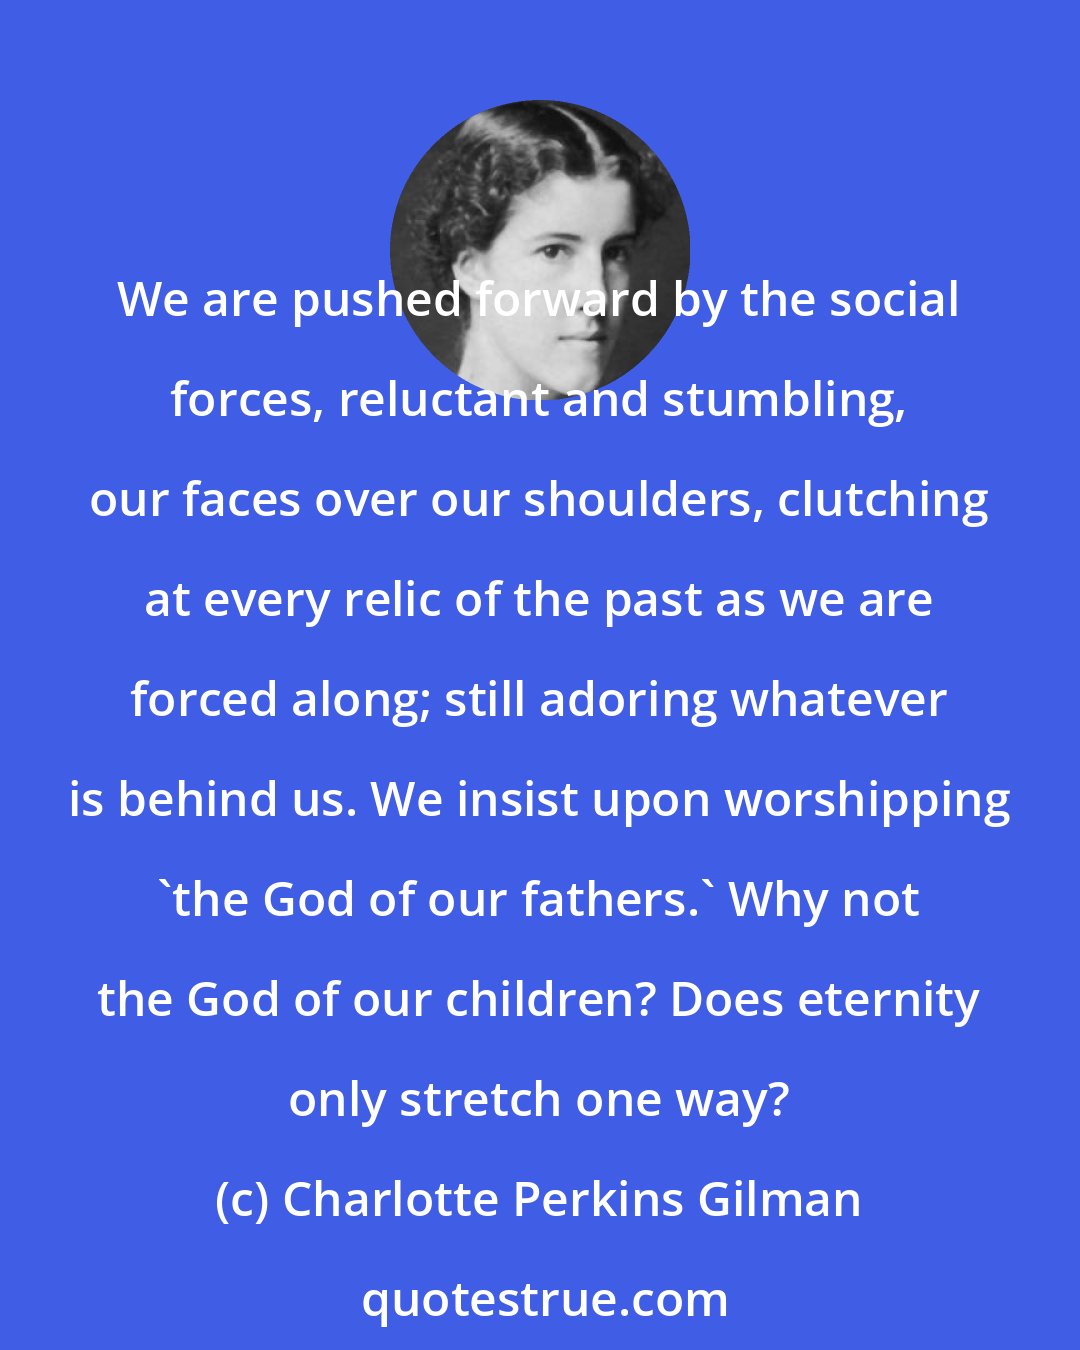 Charlotte Perkins Gilman: We are pushed forward by the social forces, reluctant and stumbling, our faces over our shoulders, clutching at every relic of the past as we are forced along; still adoring whatever is behind us. We insist upon worshipping 'the God of our fathers.' Why not the God of our children? Does eternity only stretch one way?